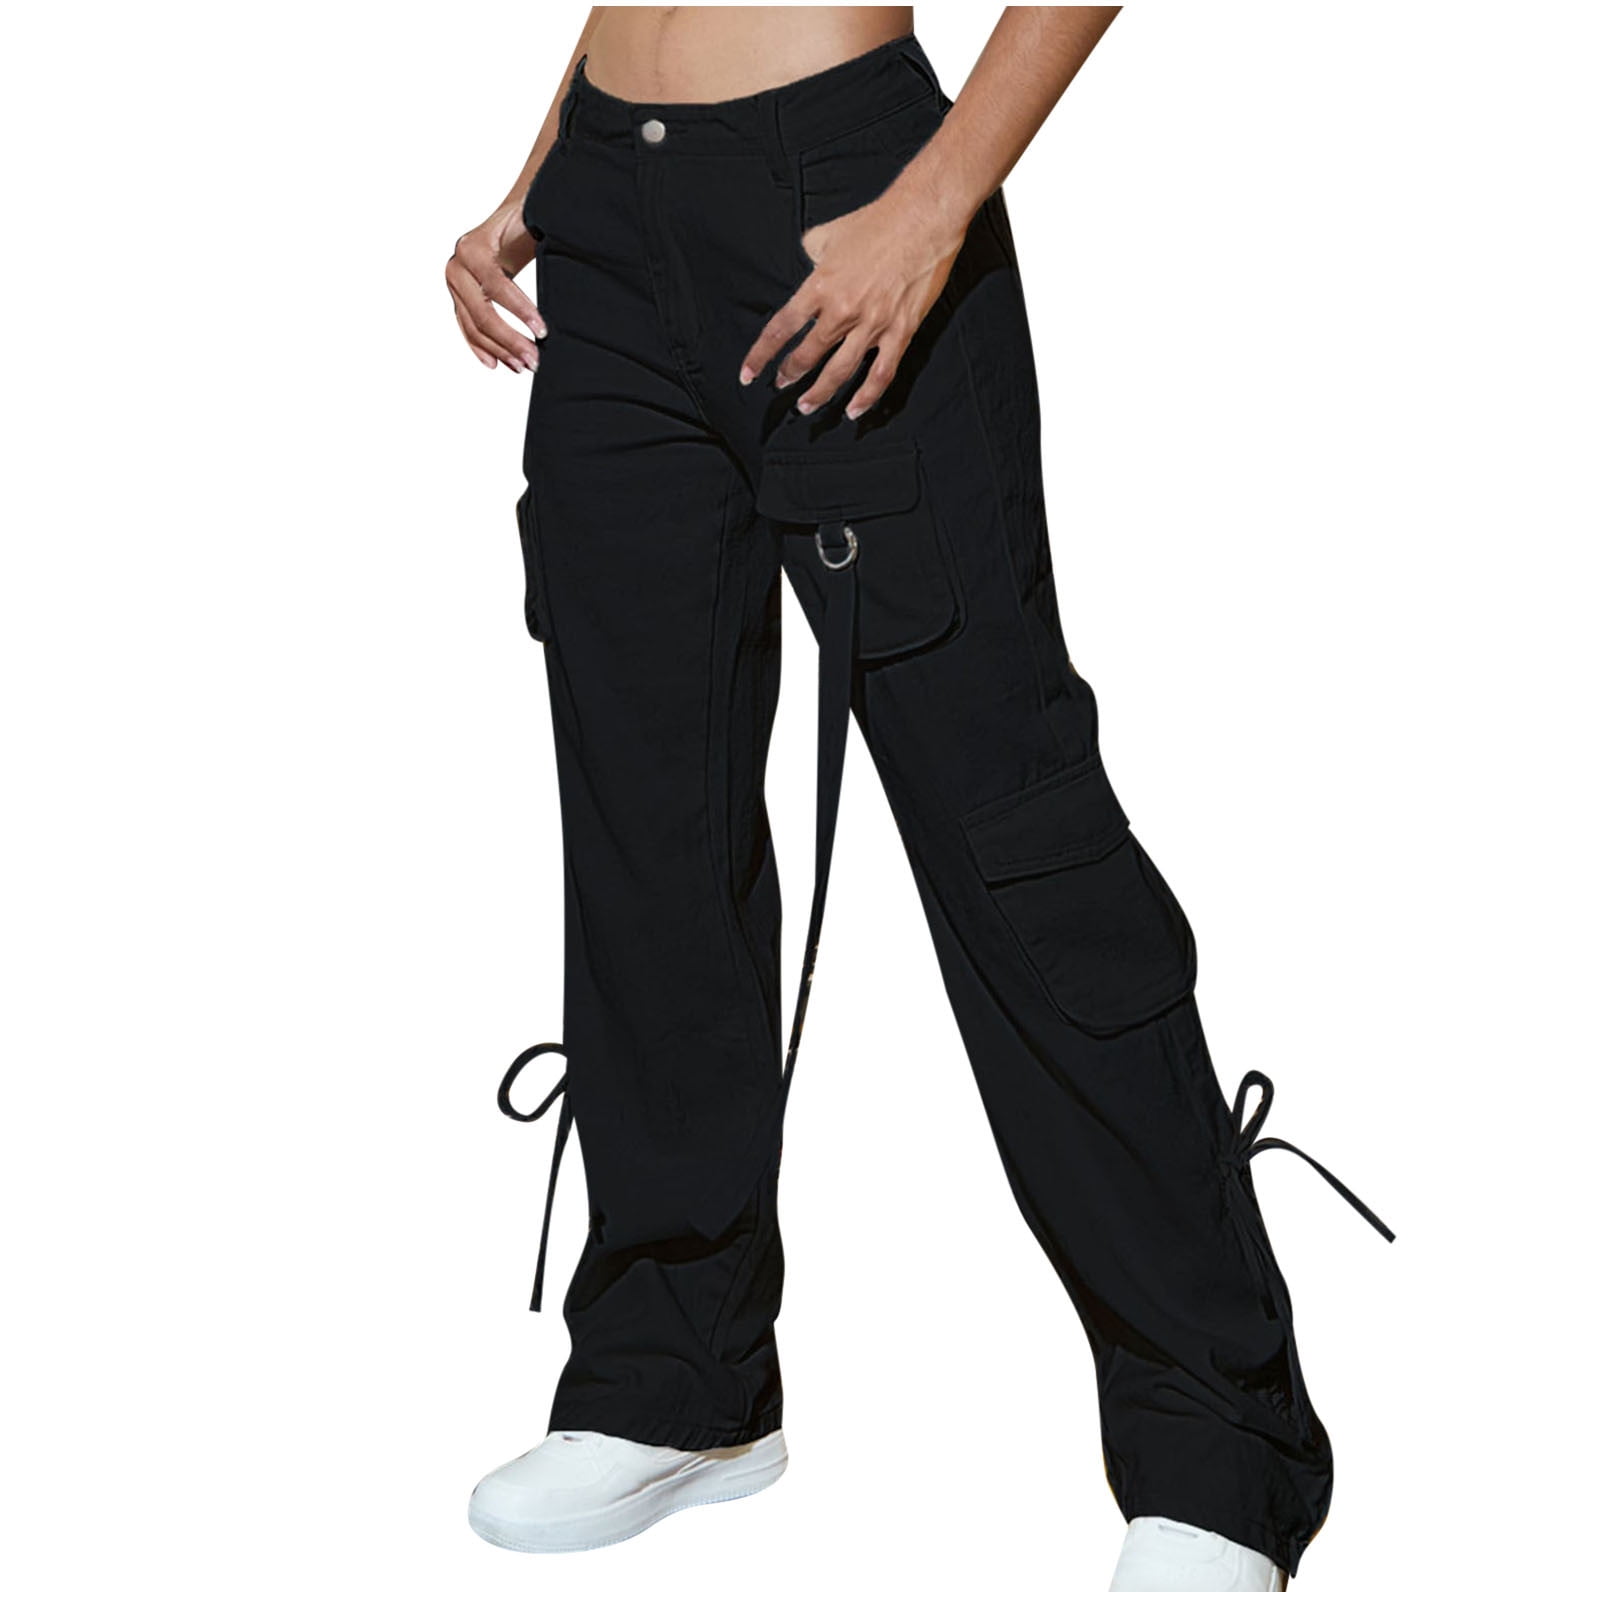  Women Baggy Sweatpants Elastic High Waisted Cinch Bottom Jogger  Pants Teen Girls Yoga Workout Sweat Pants with Pockets (Beige White, S) :  Clothing, Shoes & Jewelry